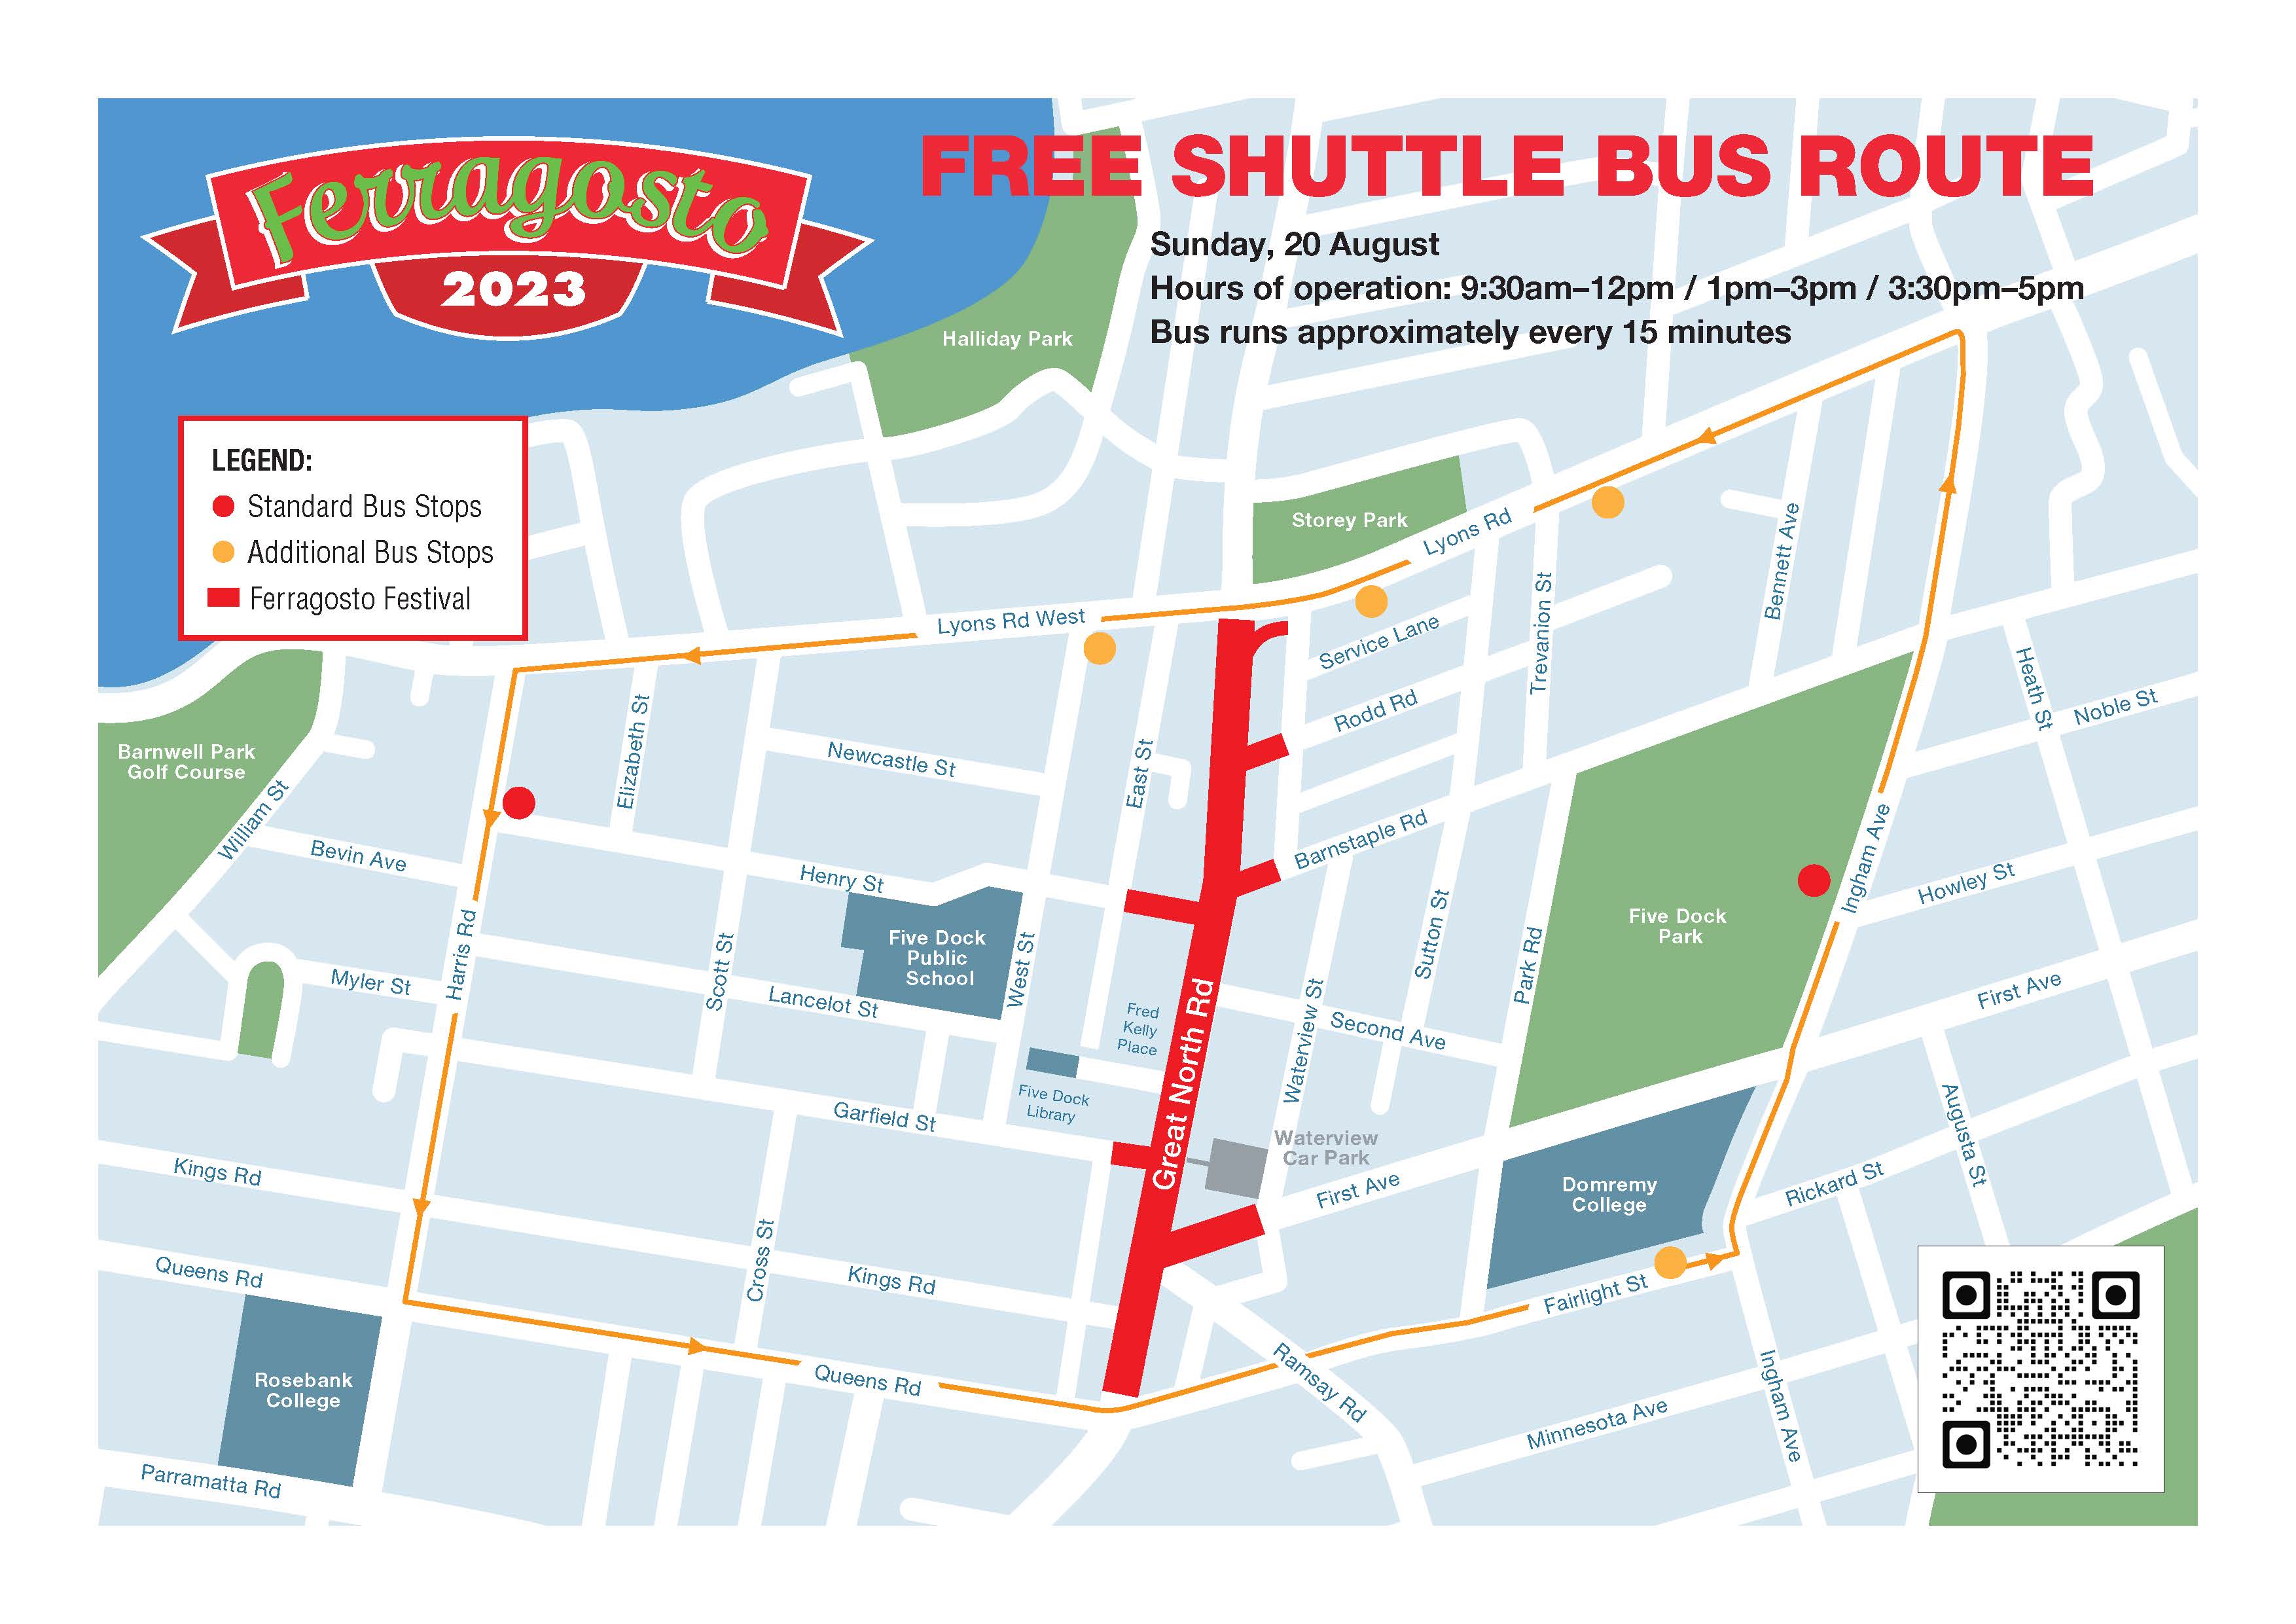 Shuttle bus map showing route of free shuttle bus along Harris Road, Queens Road, Ingham Avenue and Lyons Road West.